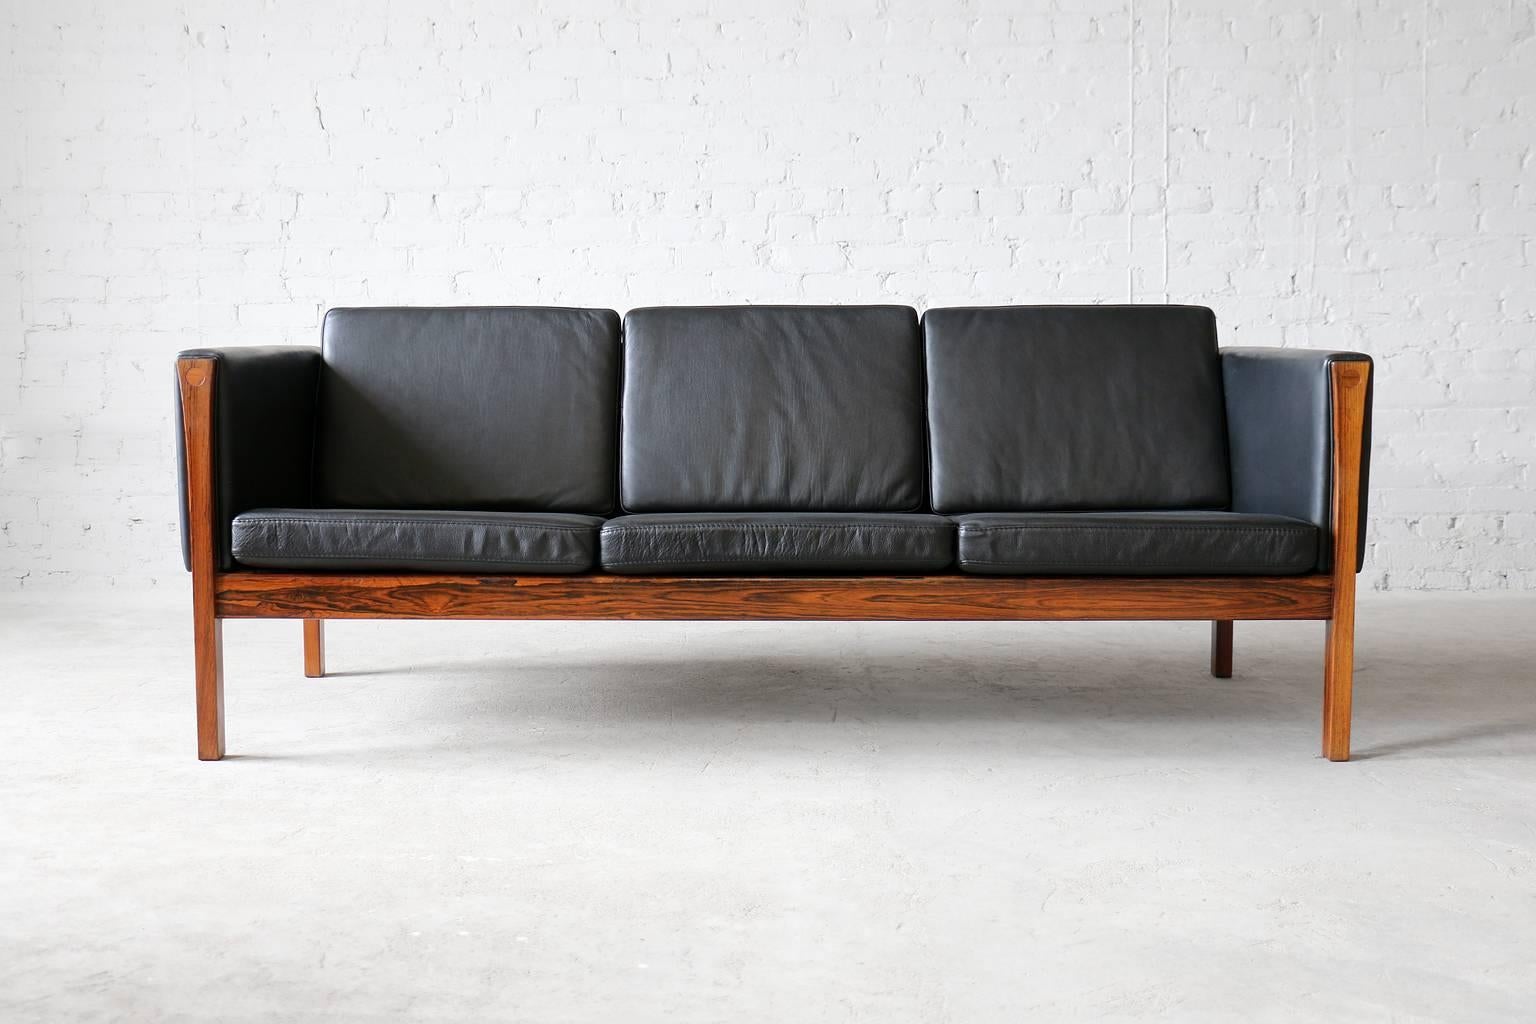 Model AP 63/3 (high variant of AP 62).
Brazilian rosewood frame.
Brand new aniline leather cushions.

Incredible vintage sofa designed by Hans Wegner for AP Stolen. This piece features an luxurious Brazilian rosewood frame as well as brand new